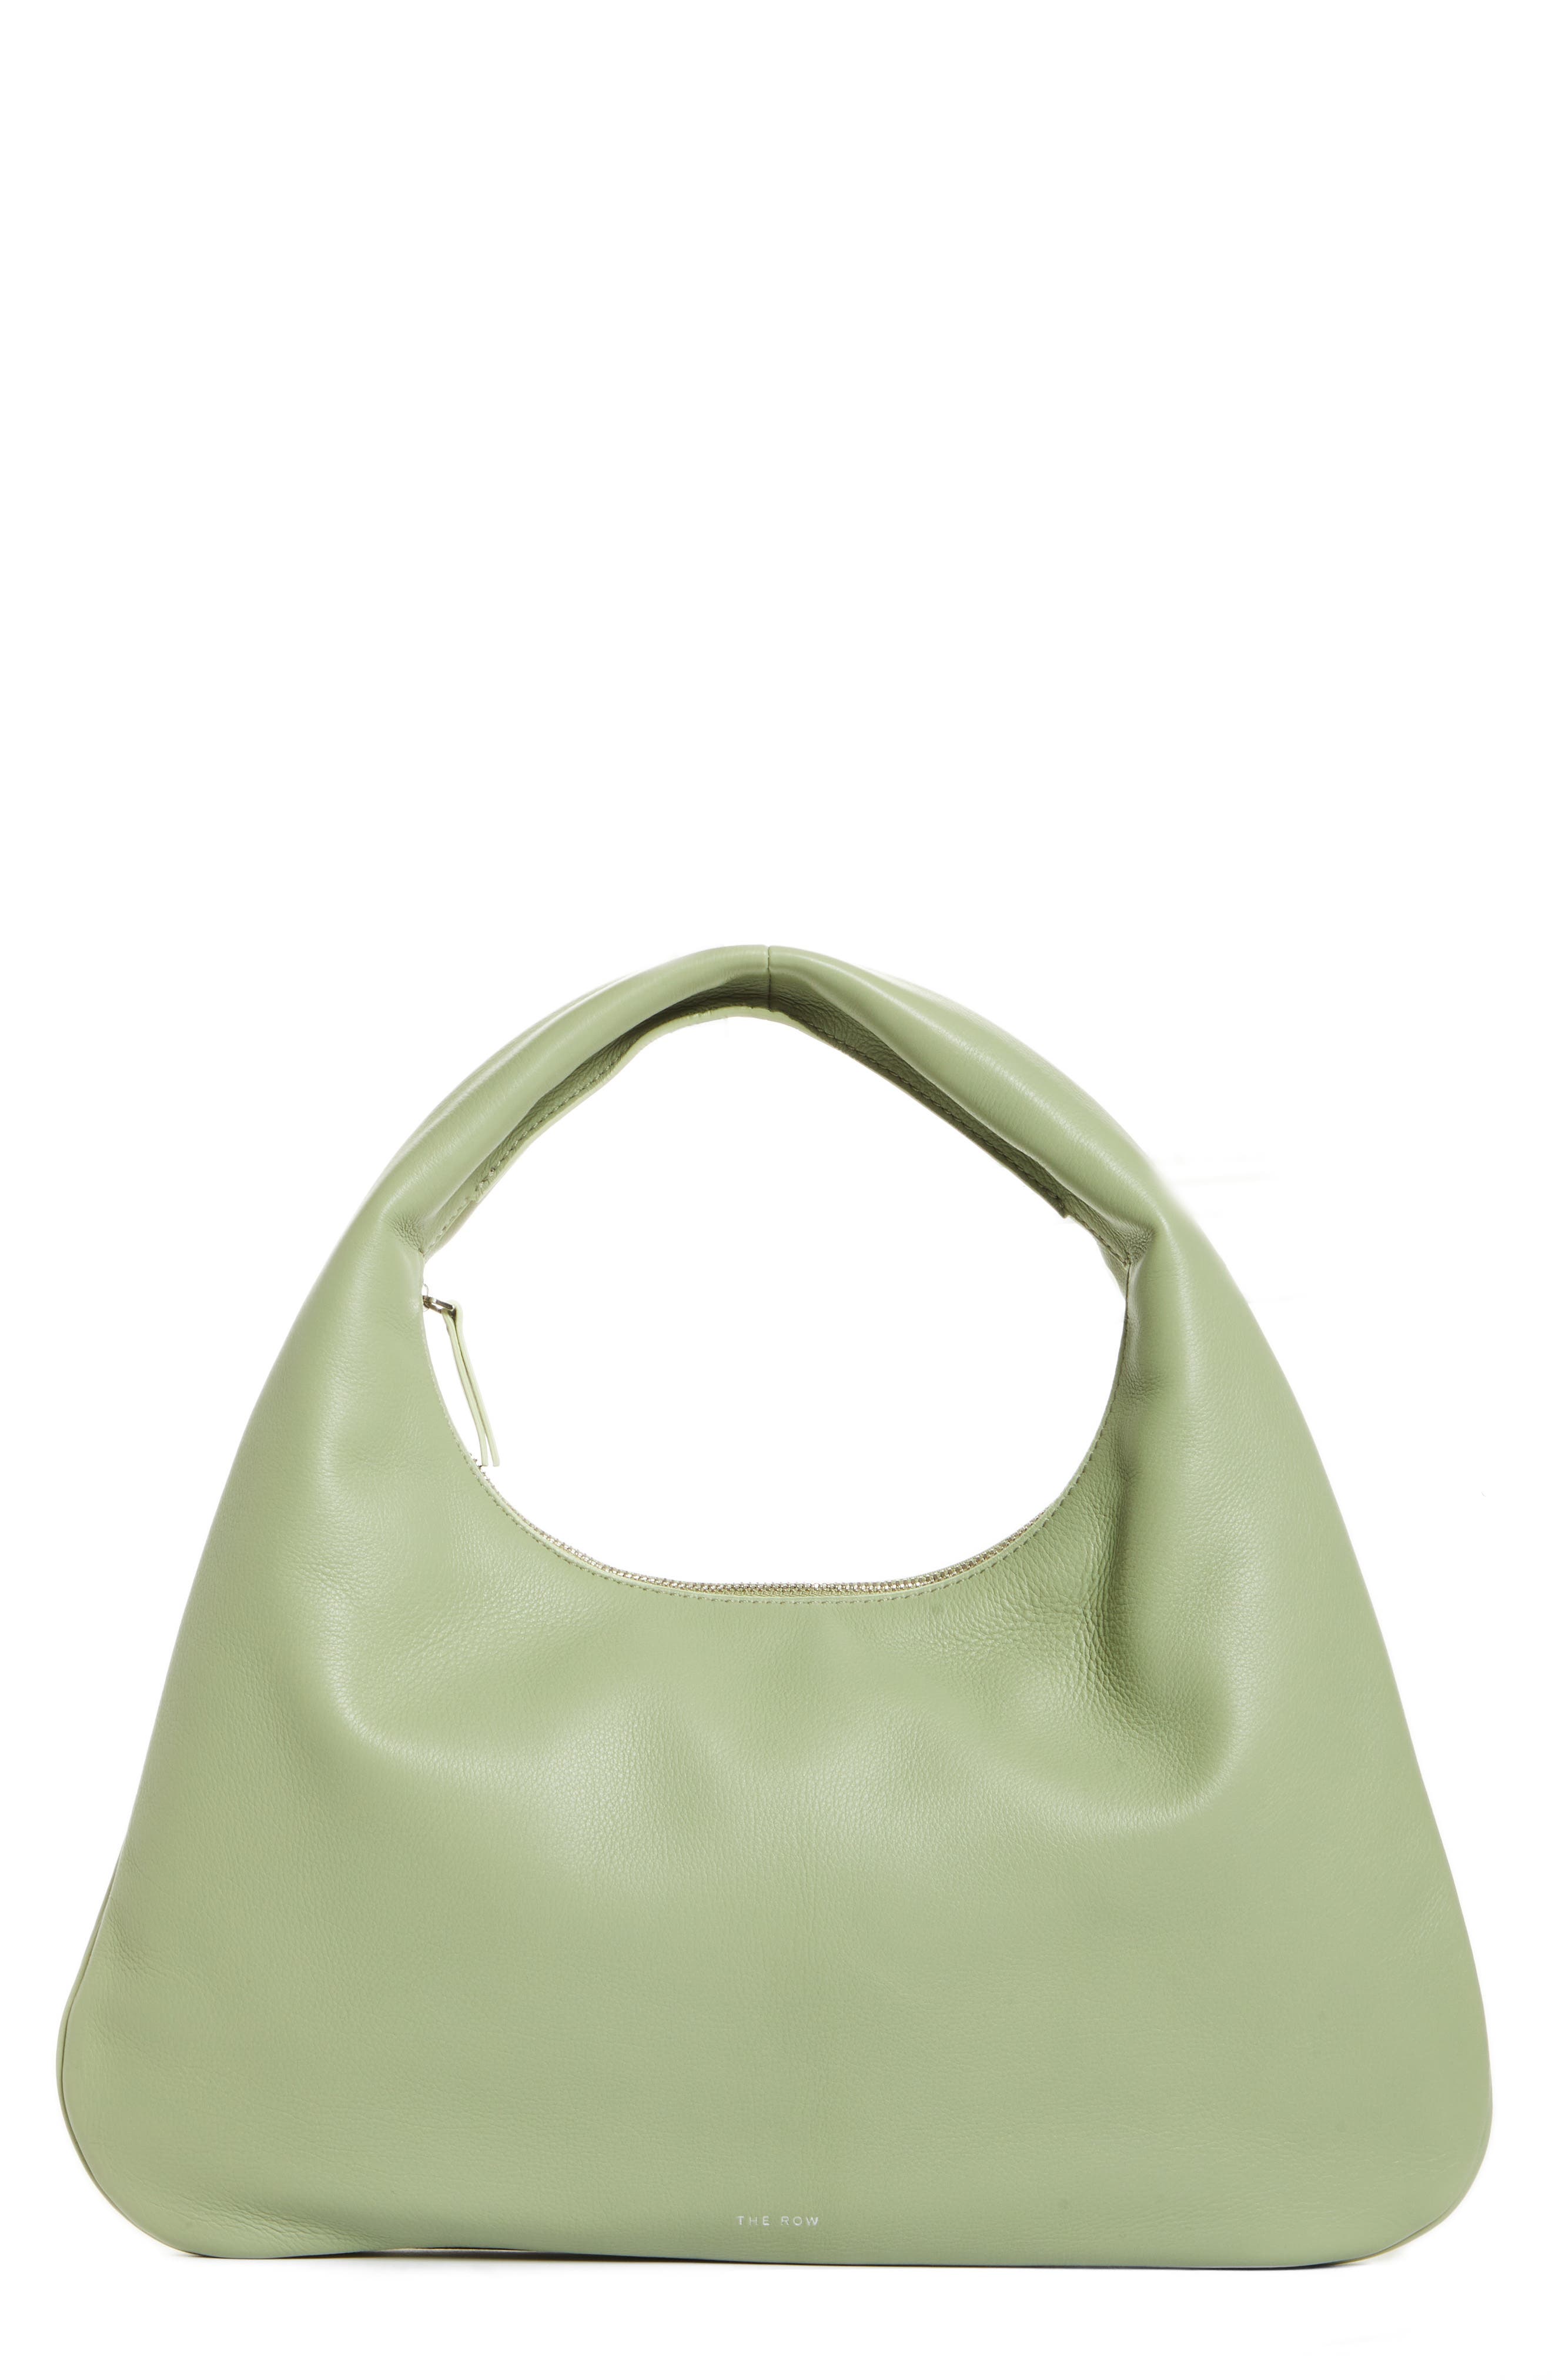 The Row Small Everyday Leather Shoulder Bag in Dusty Green at Nordstrom